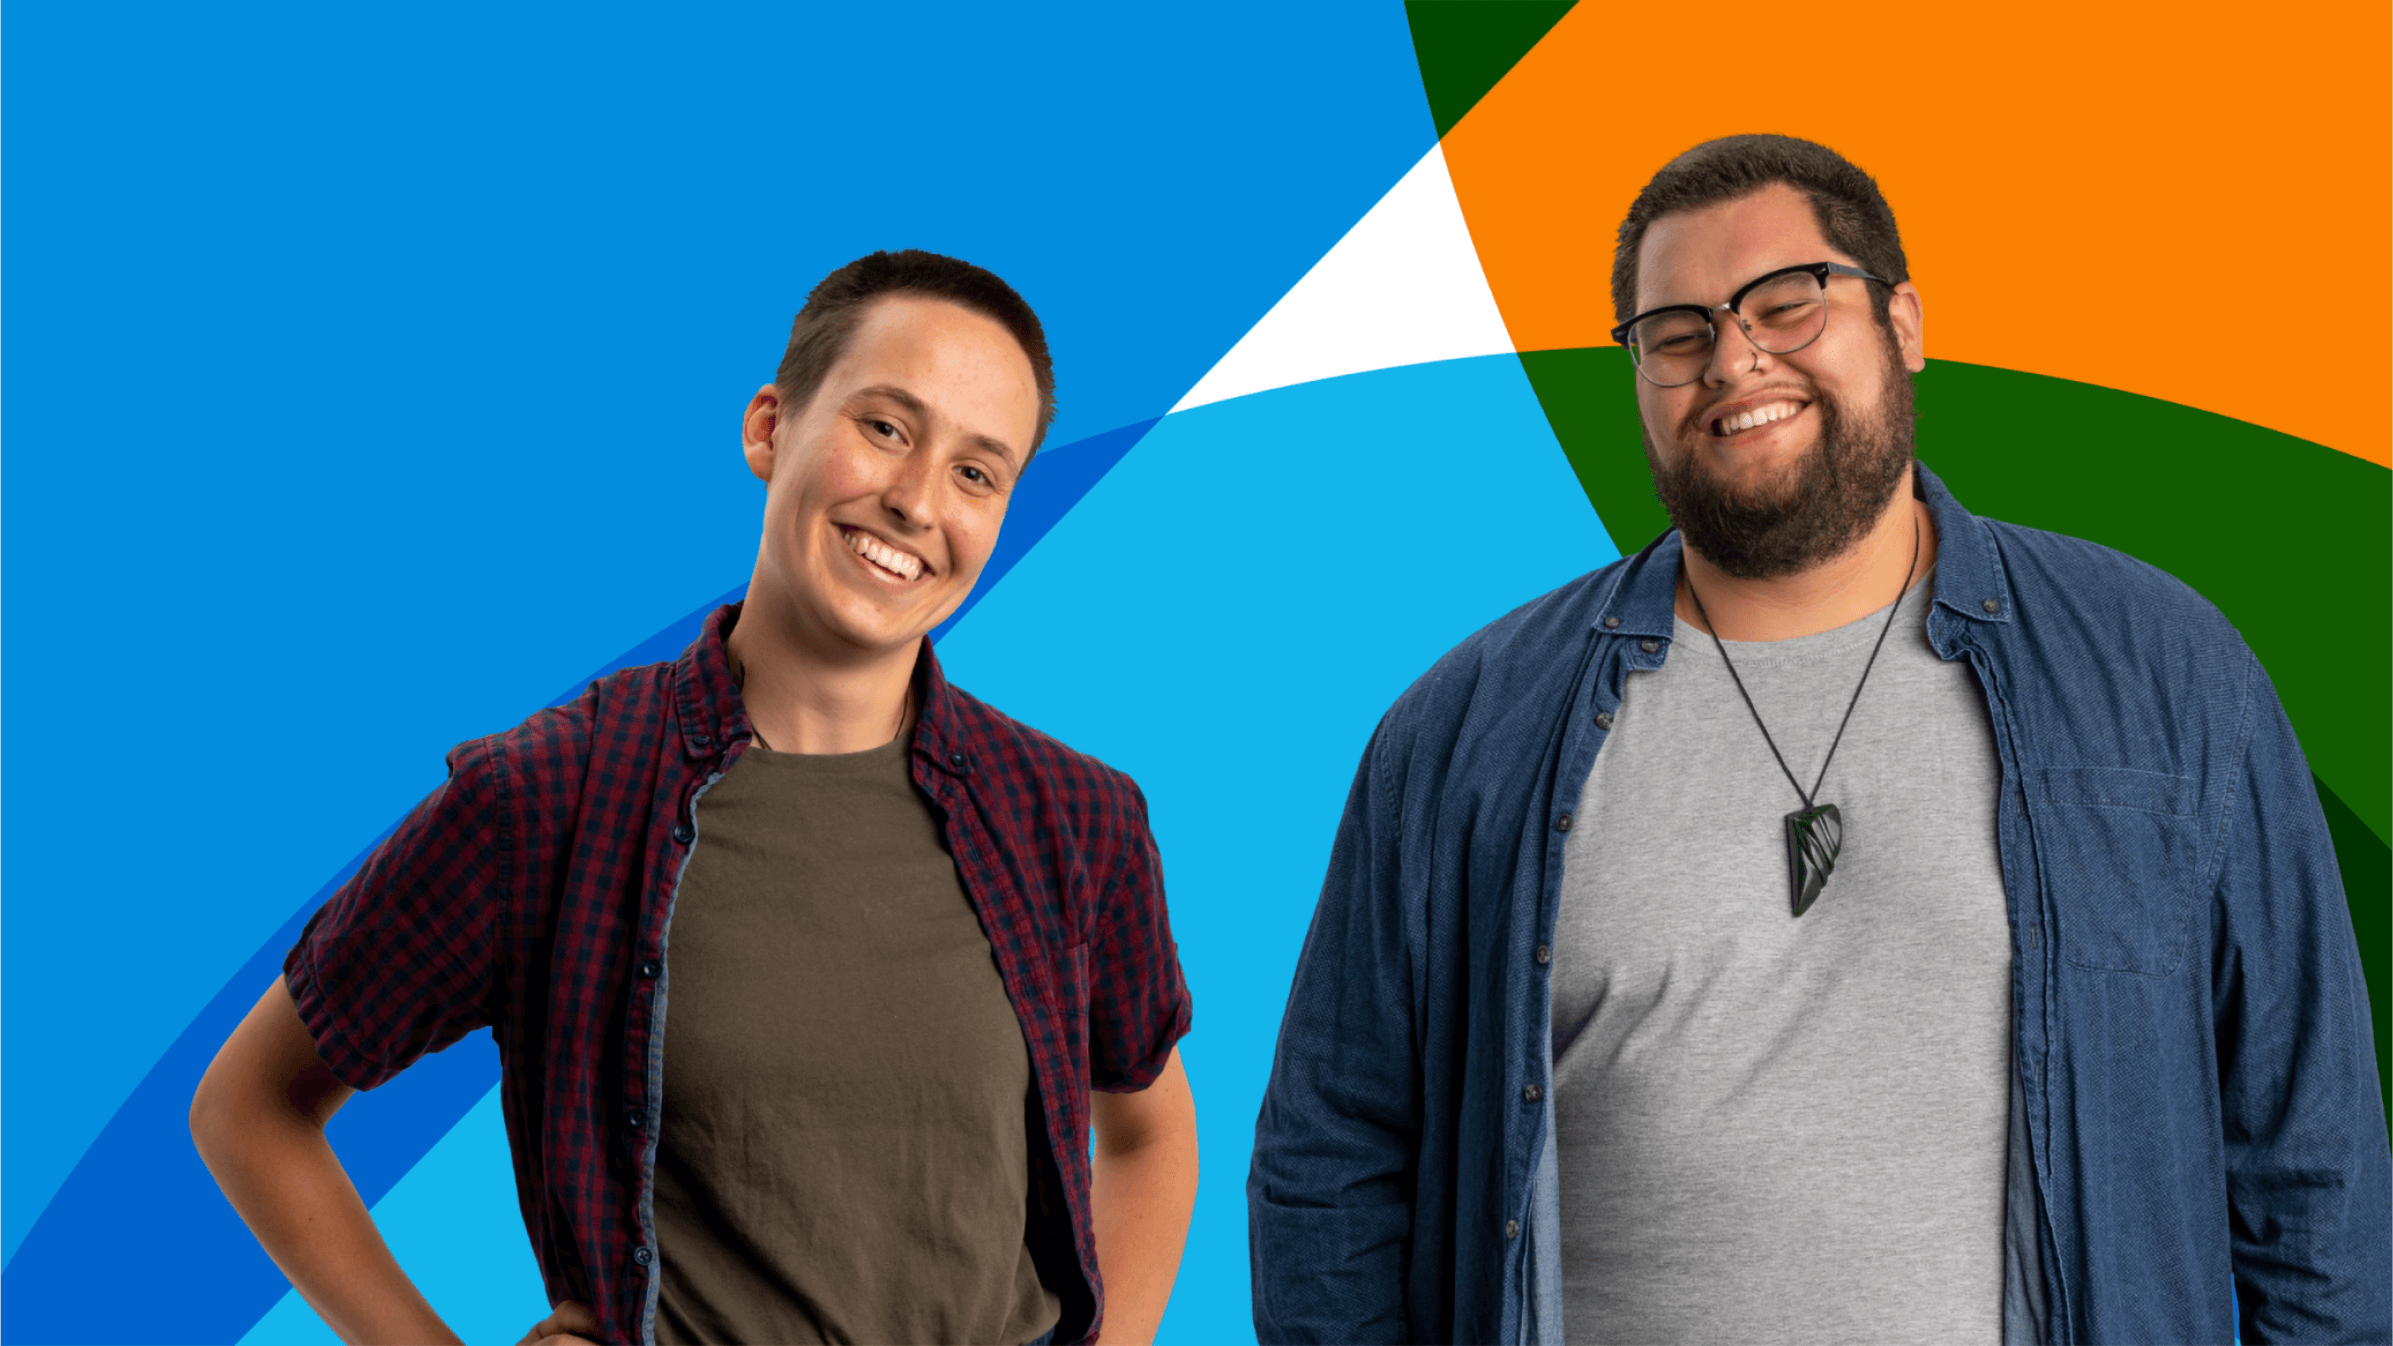 Alt text: Two Xero grads smiling in front of a colorful background.